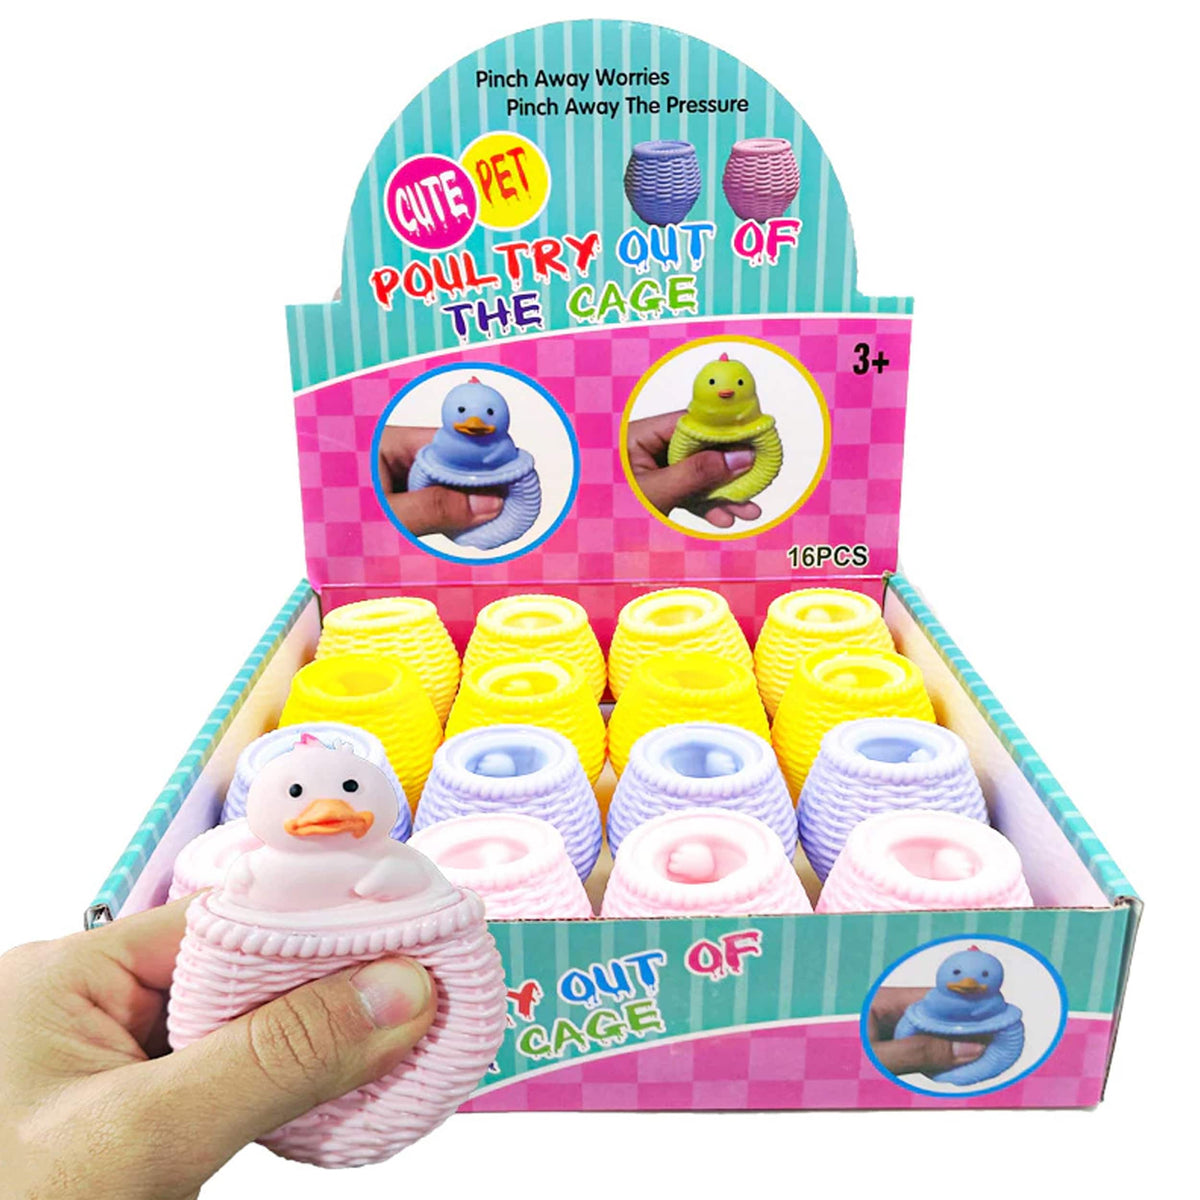 Poul Mochi Cute Animal - Adorable and Squishy Toys for Kids